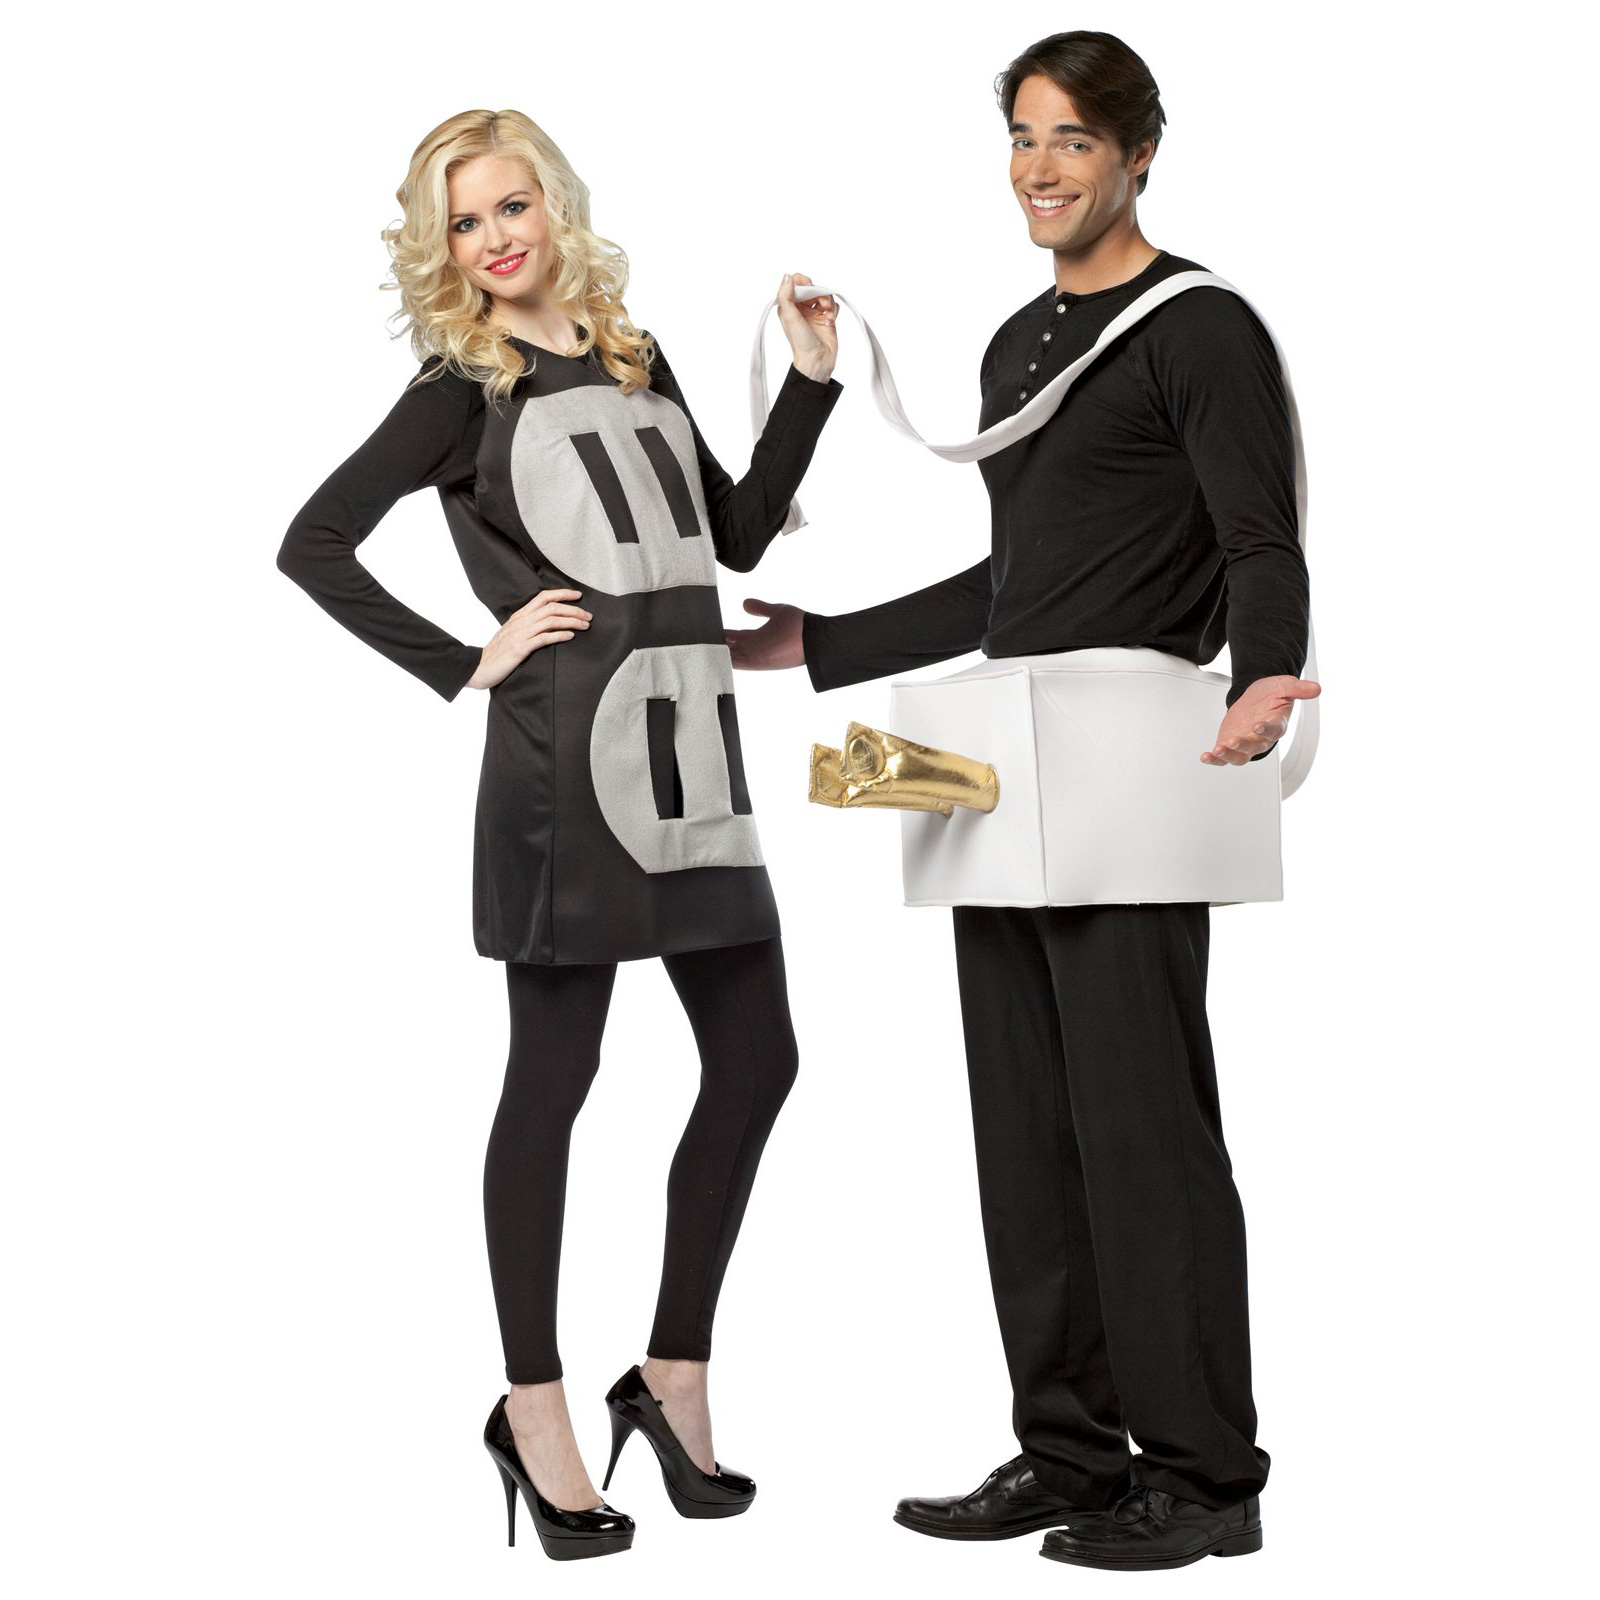 Couple Halloween Costumes For Adult with Plug and Socket Costume.